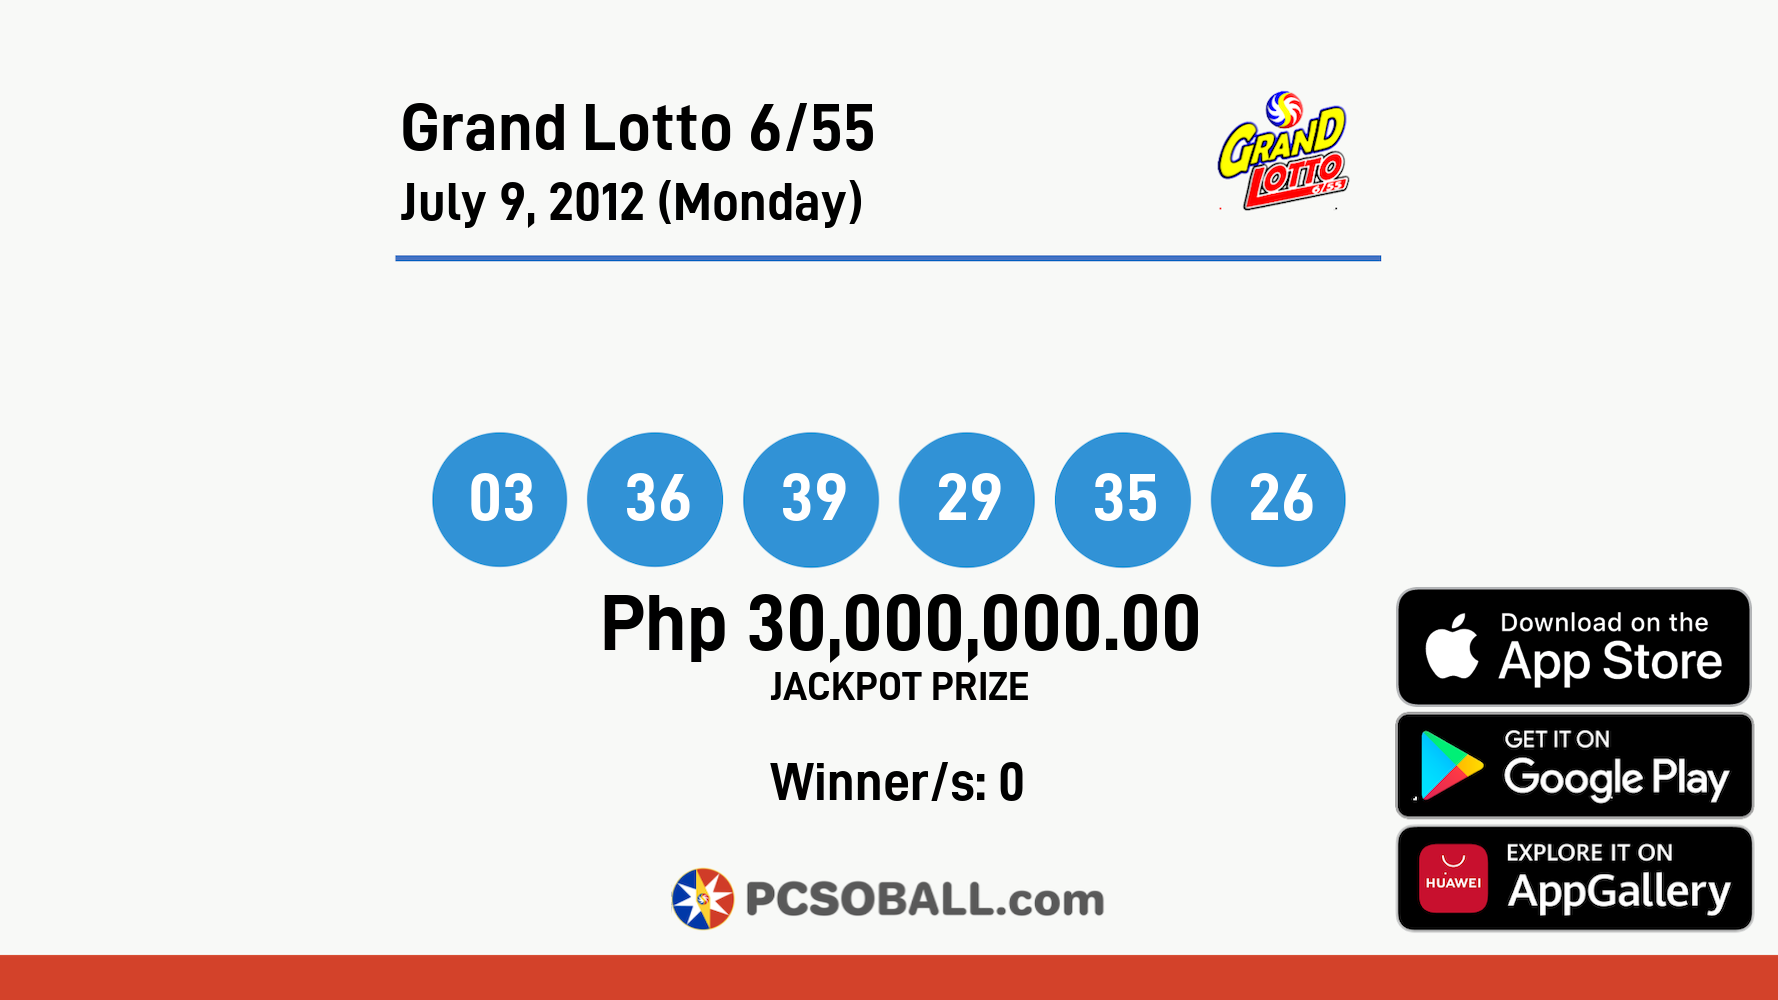 Grand Lotto 6/55 July 9, 2012 (Monday) Result